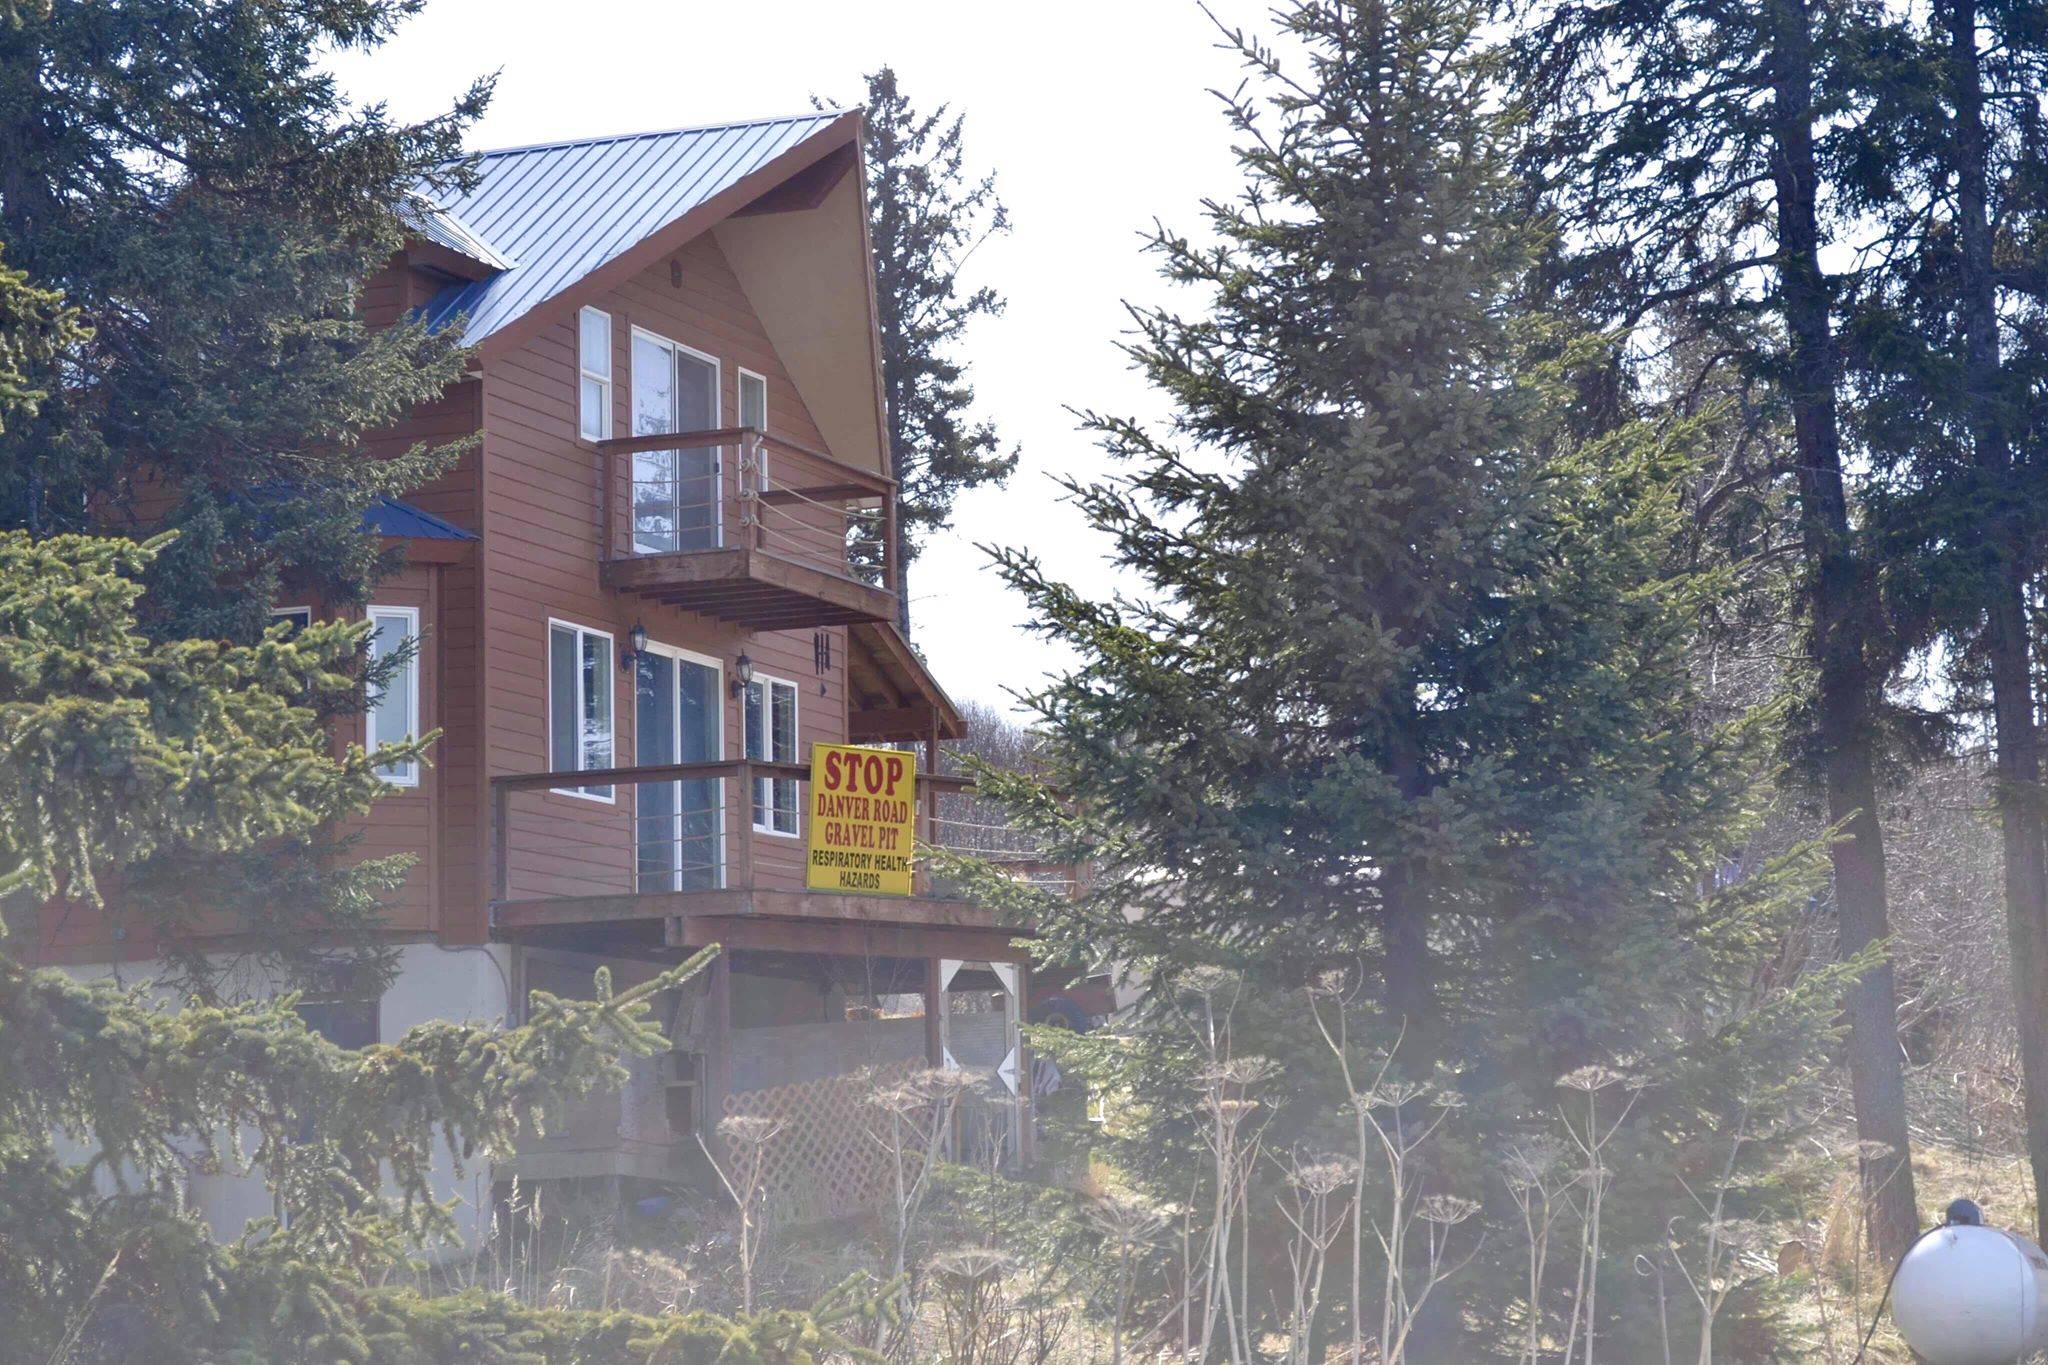 Several homes and businesses in the neighborhood near the proposed Beachcomber LLC gravel pit posted signs opposing excavation in the area, on May 2, 2019, in Anchor Point, Alaska. (Photo by Victoria Petersen/Peninsula Clarion)